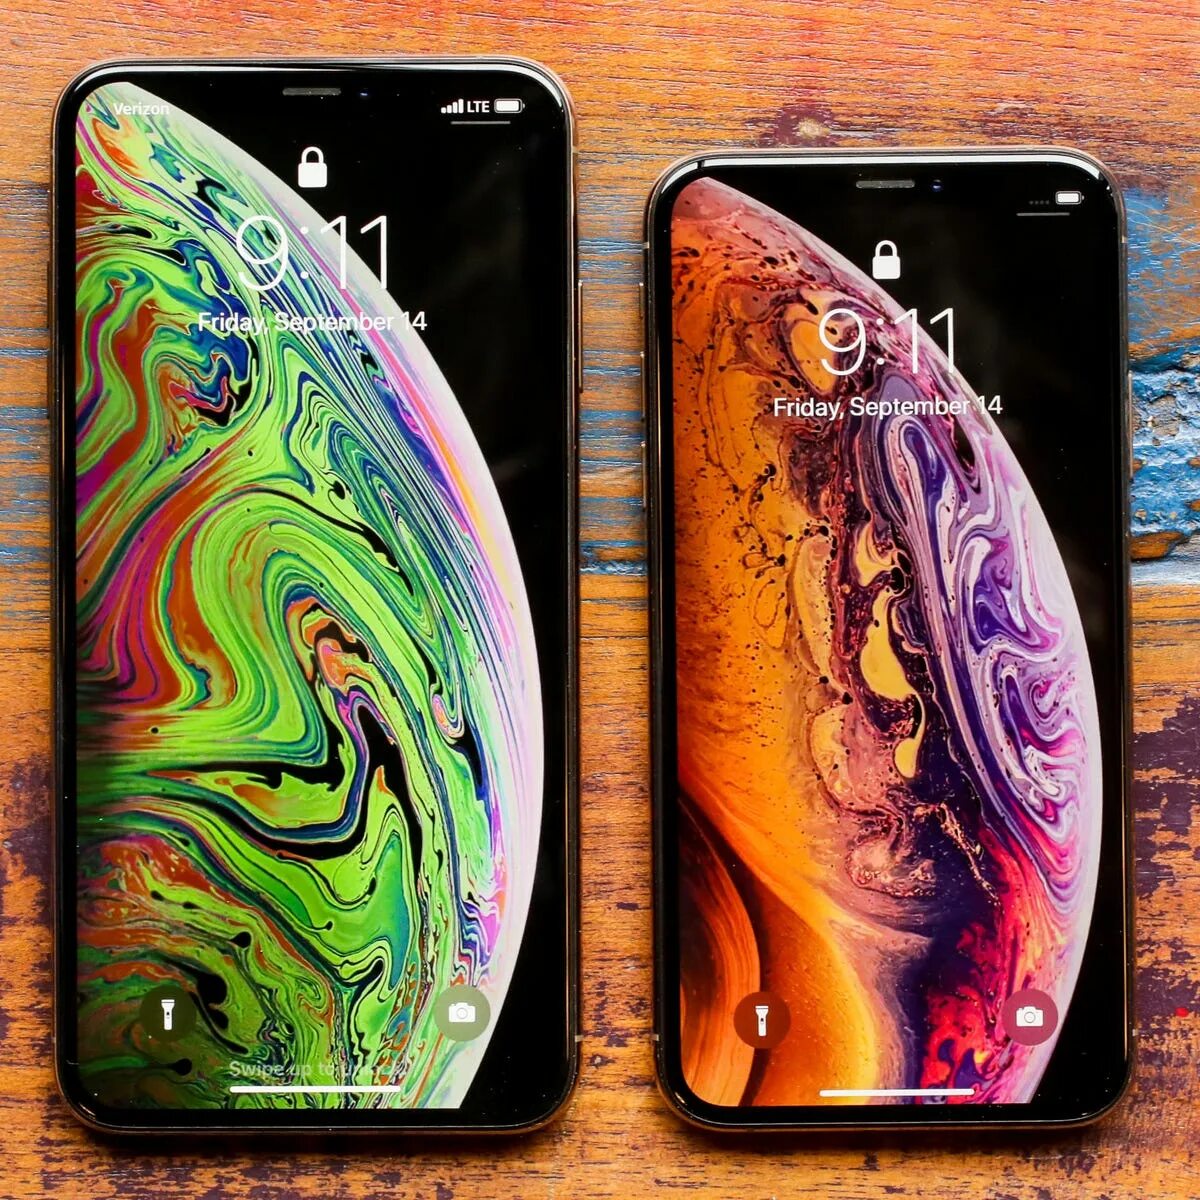 Iphone xs дата. Iphone XS iphone XS Max. Iphone 10 XS Max. Айфон XS И XS Max разница. Iphone 10s Max.